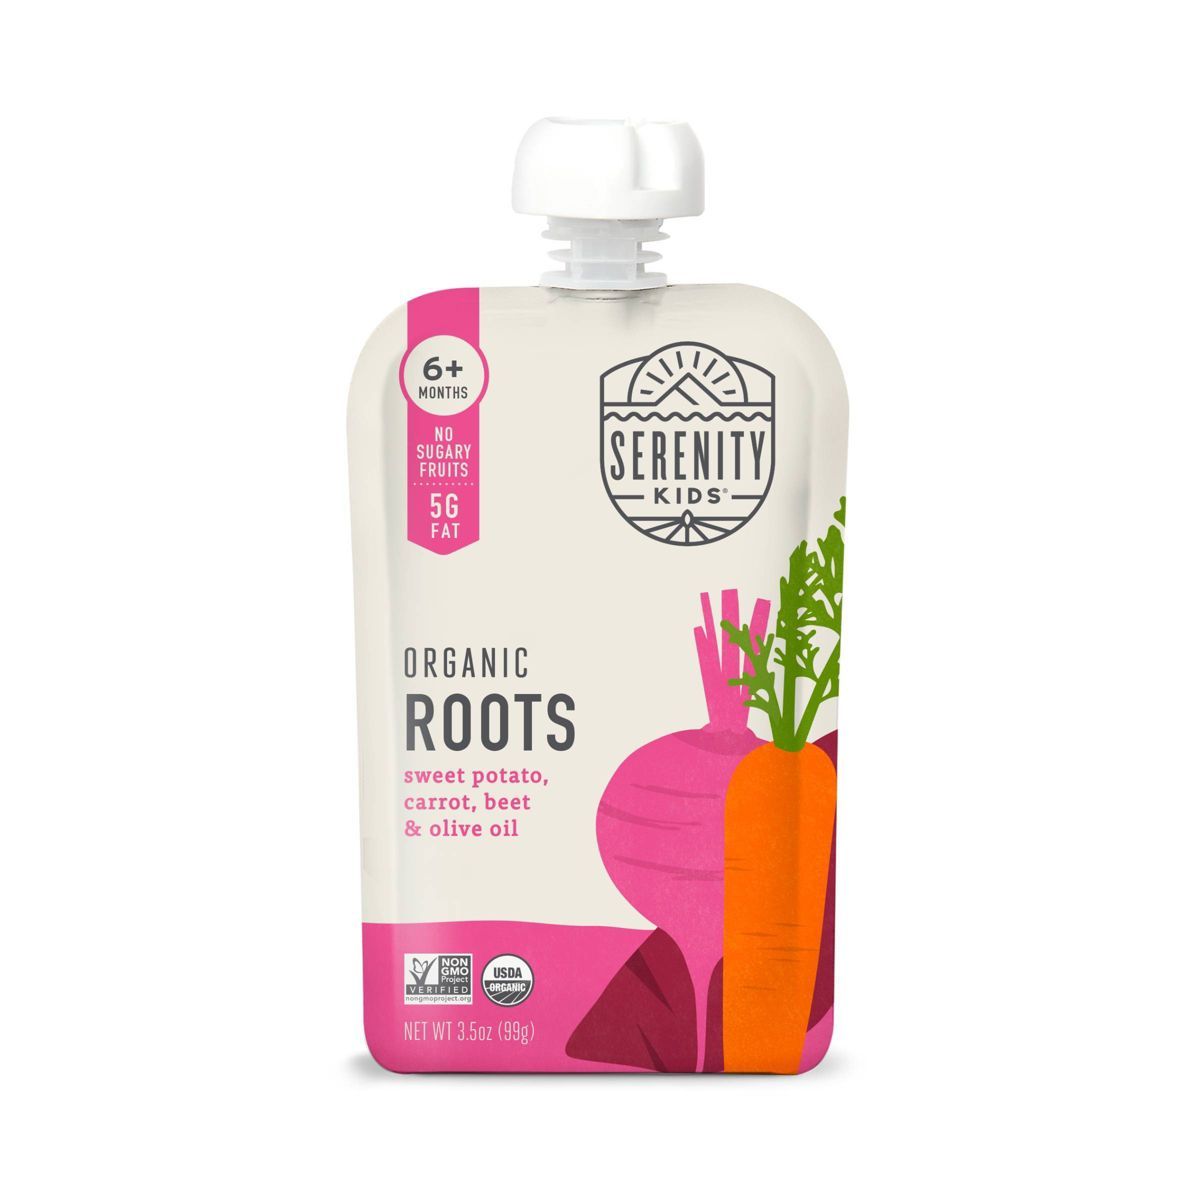 Serenity Kids Organic Roots with Olive Oil Baby Meals - 3.5oz | Target